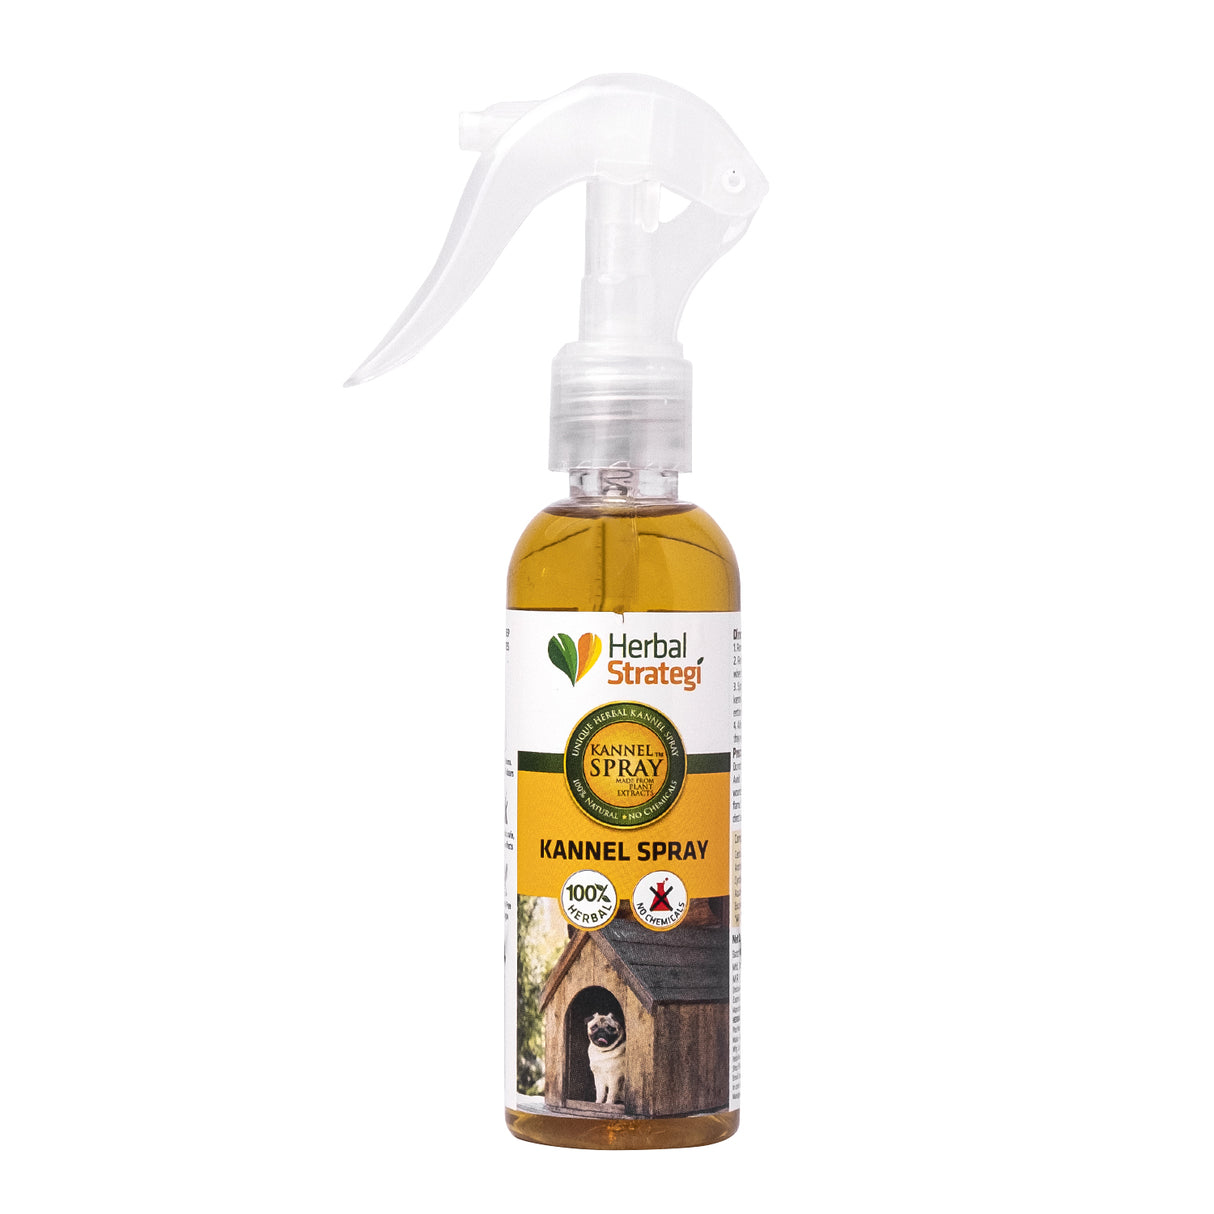 Herbal Ticks, Fleas, Lice, and Mites Spray for Kennel | Product Size: 100 ml, 500 ml